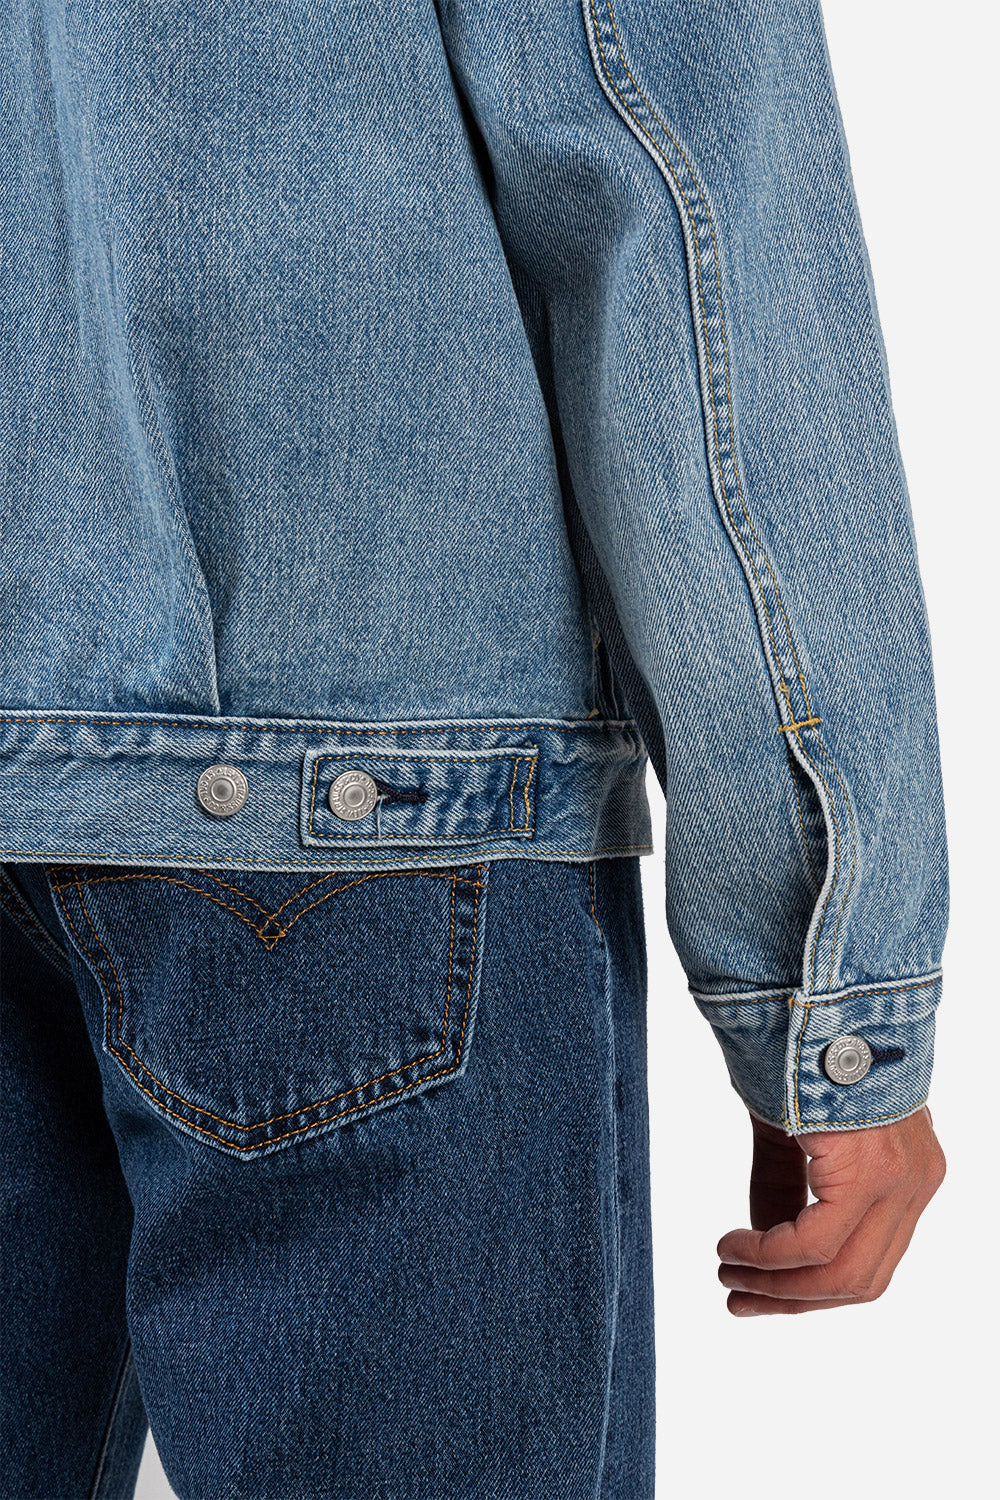 Levi's Contemporary Type 2 Trucker Jacket in Seen the Light - Wallace